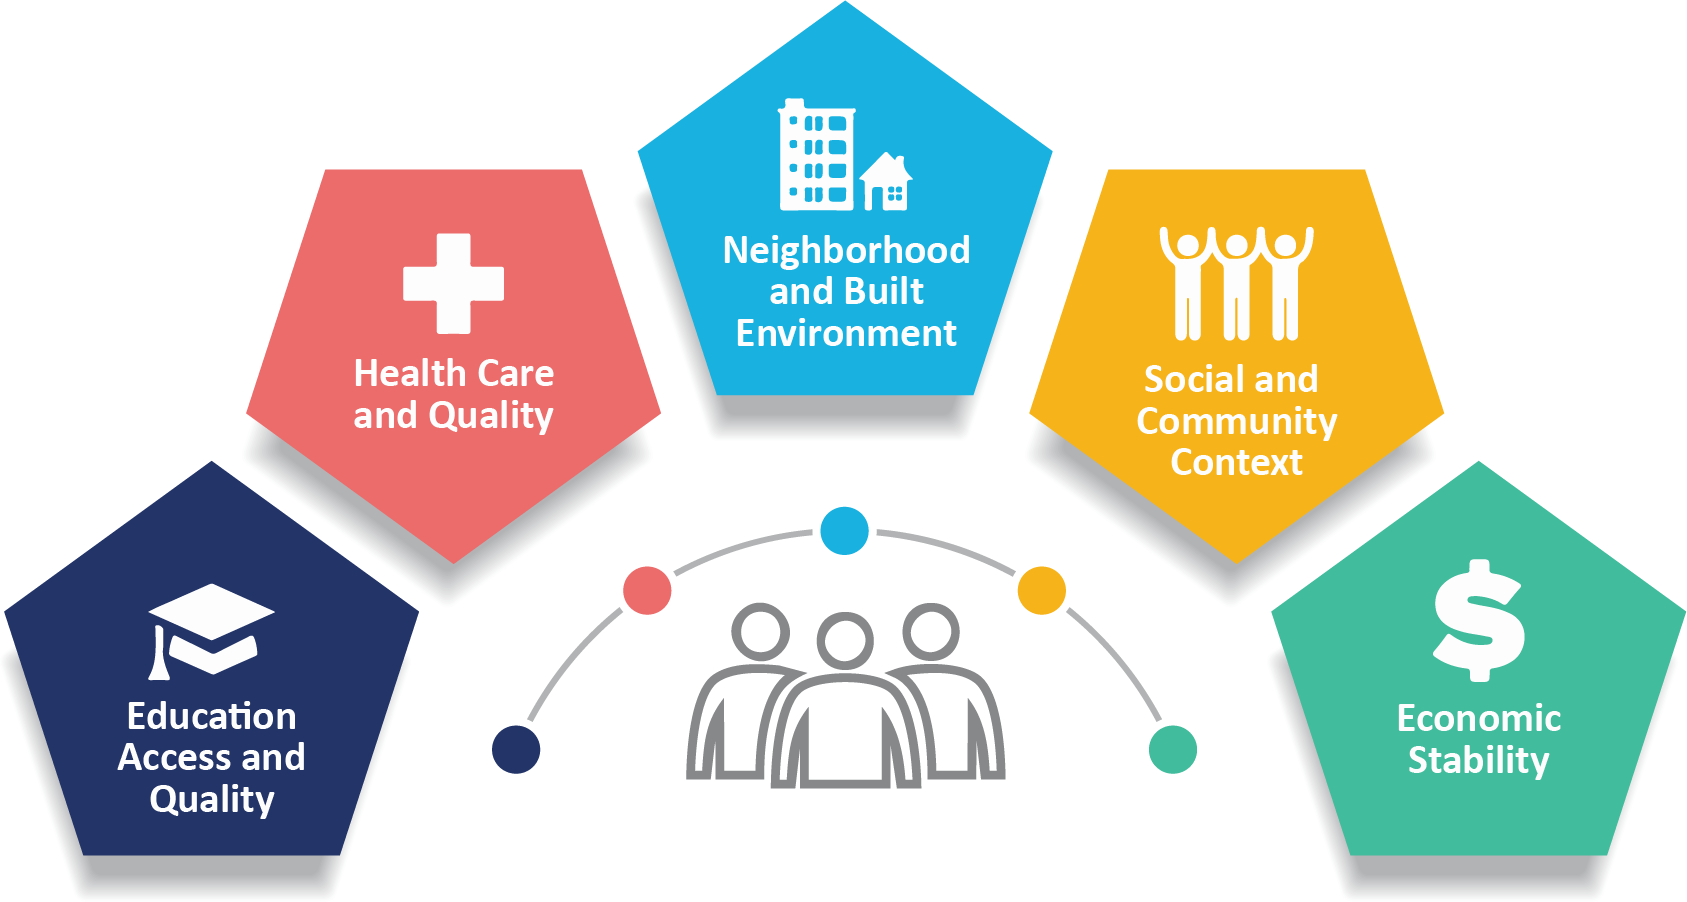 social determinates of health icons. each icon lists a social determinate of health. from left to right they read Education Access, Health Care, Neighborhood and Built Environment, Social Community context, and economic Stability